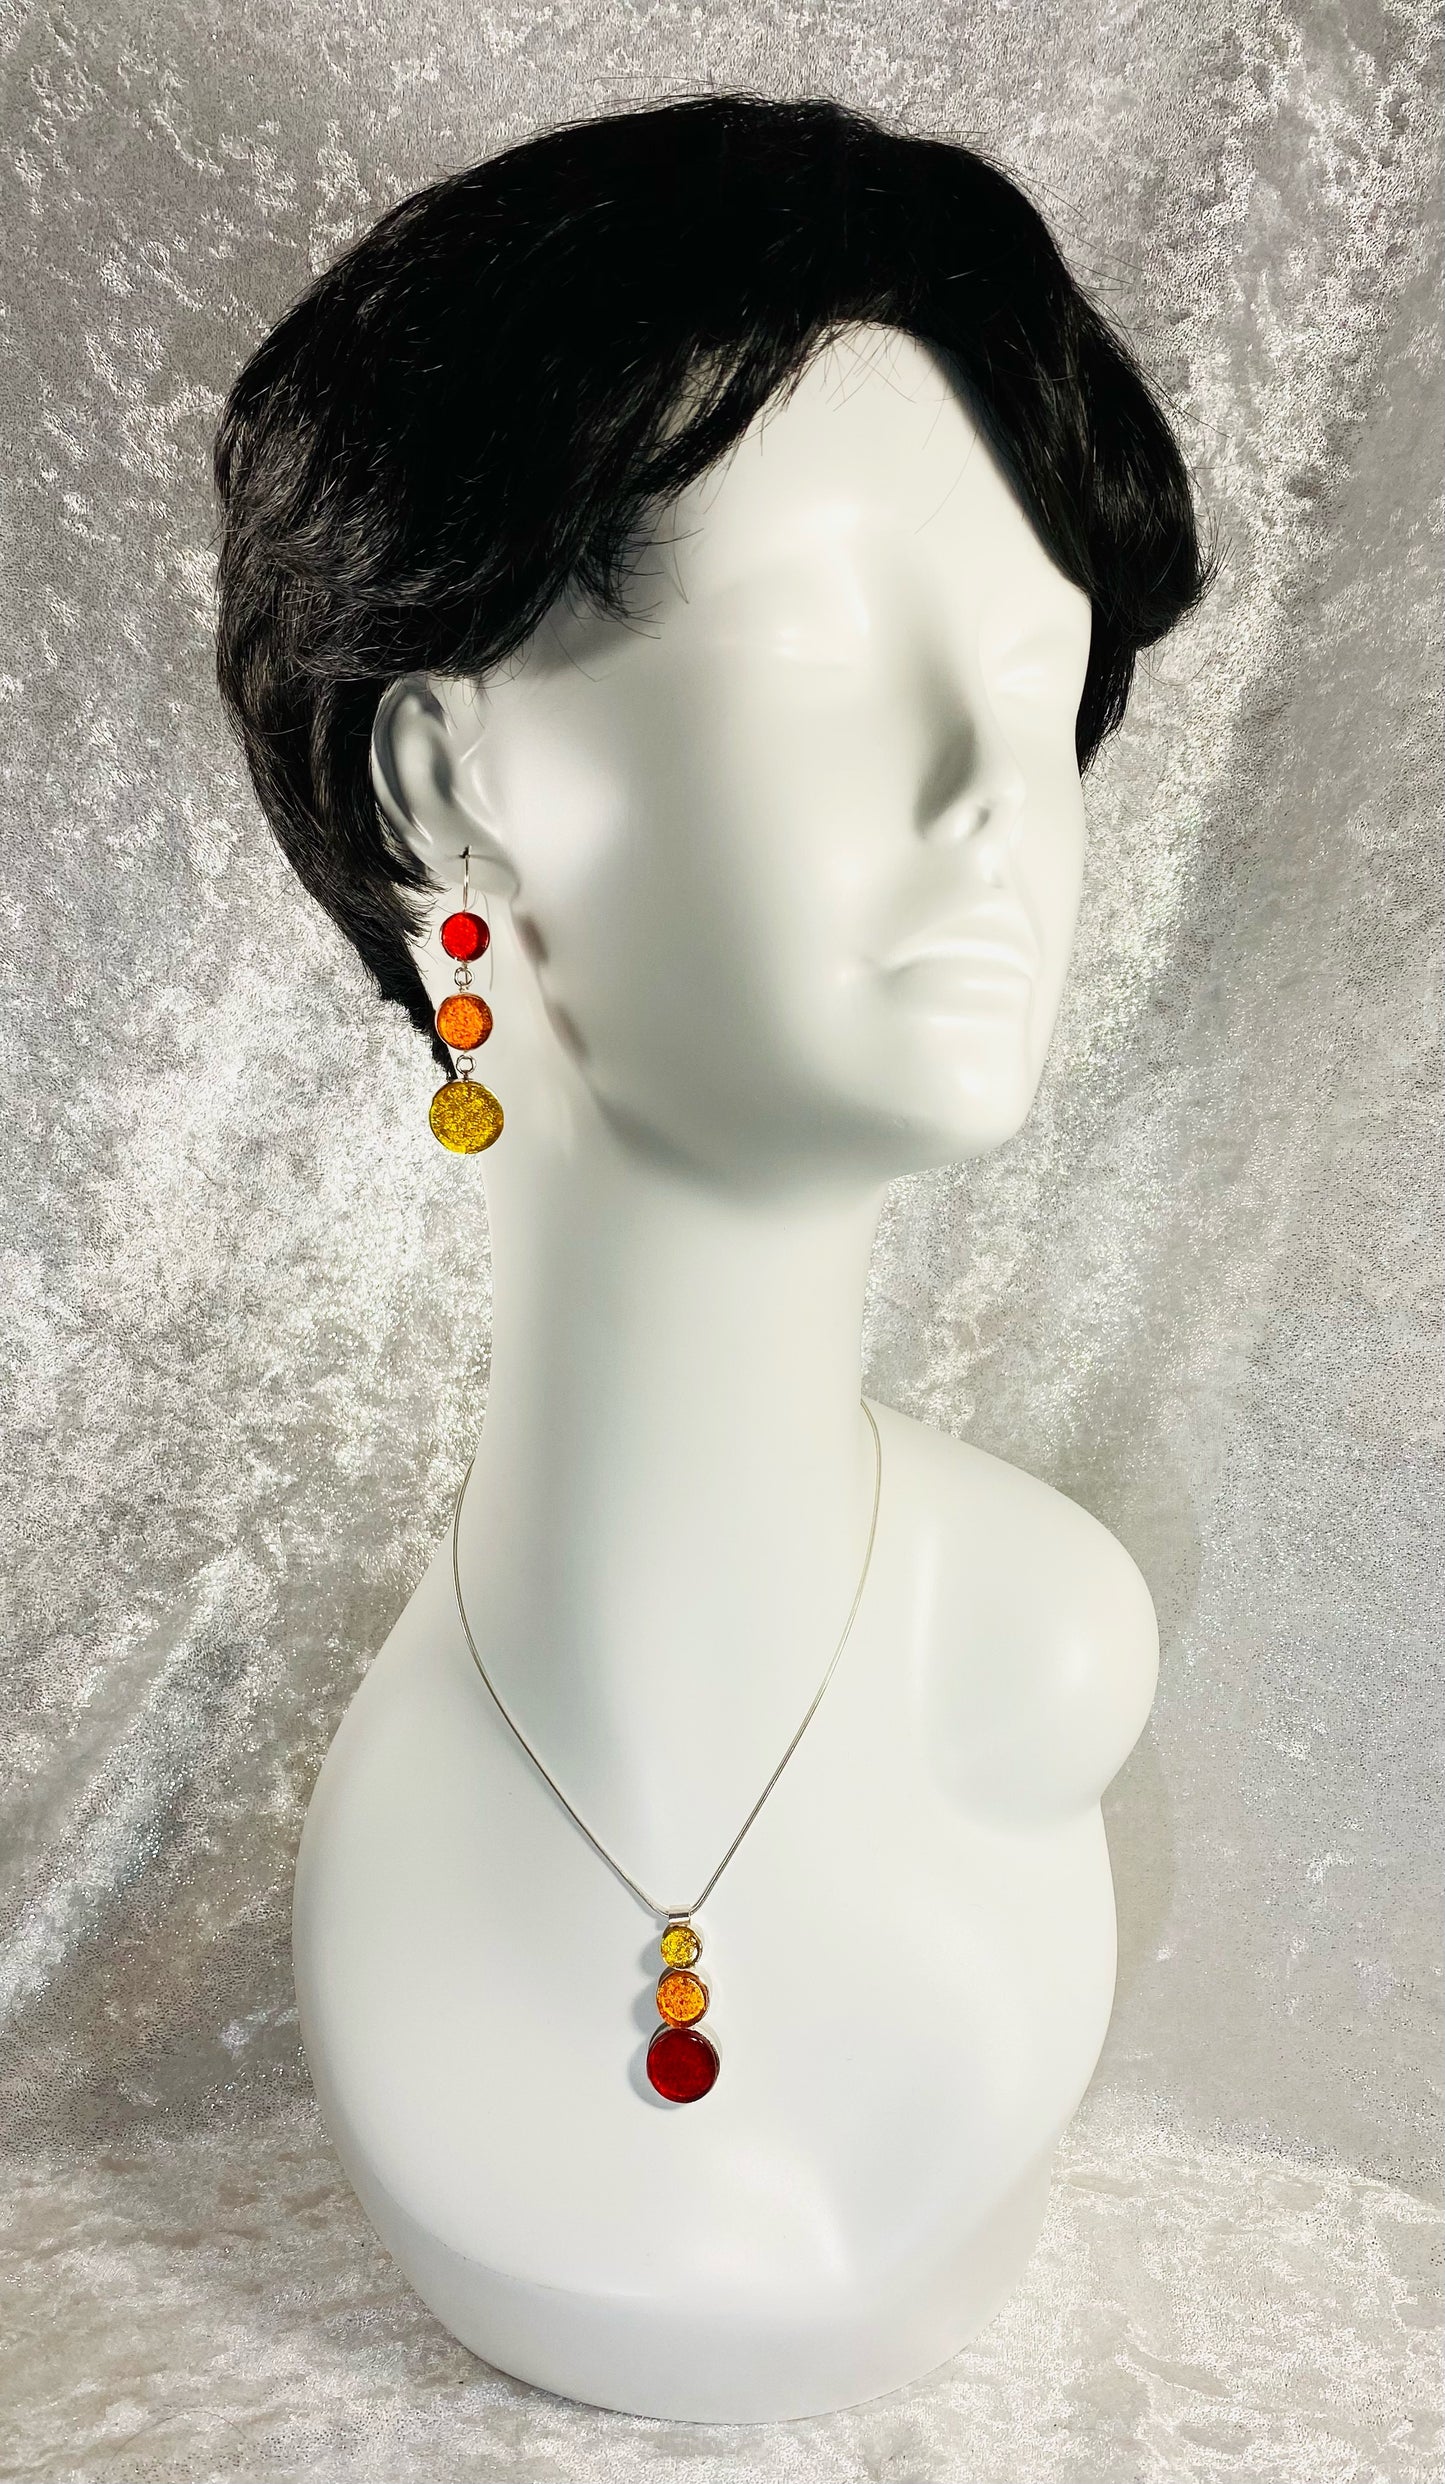 triple circle drop necklace, yellow, orange, red, fused glass, glass jewelry, glass and silver jewelry, handmade, handcrafted, American Craft, hand fabricated jewelry, hand fabricated jewellery, Athen, Georgia, colorful jewelry, sparkle, bullseye glass, dichroic glass, art jewelry